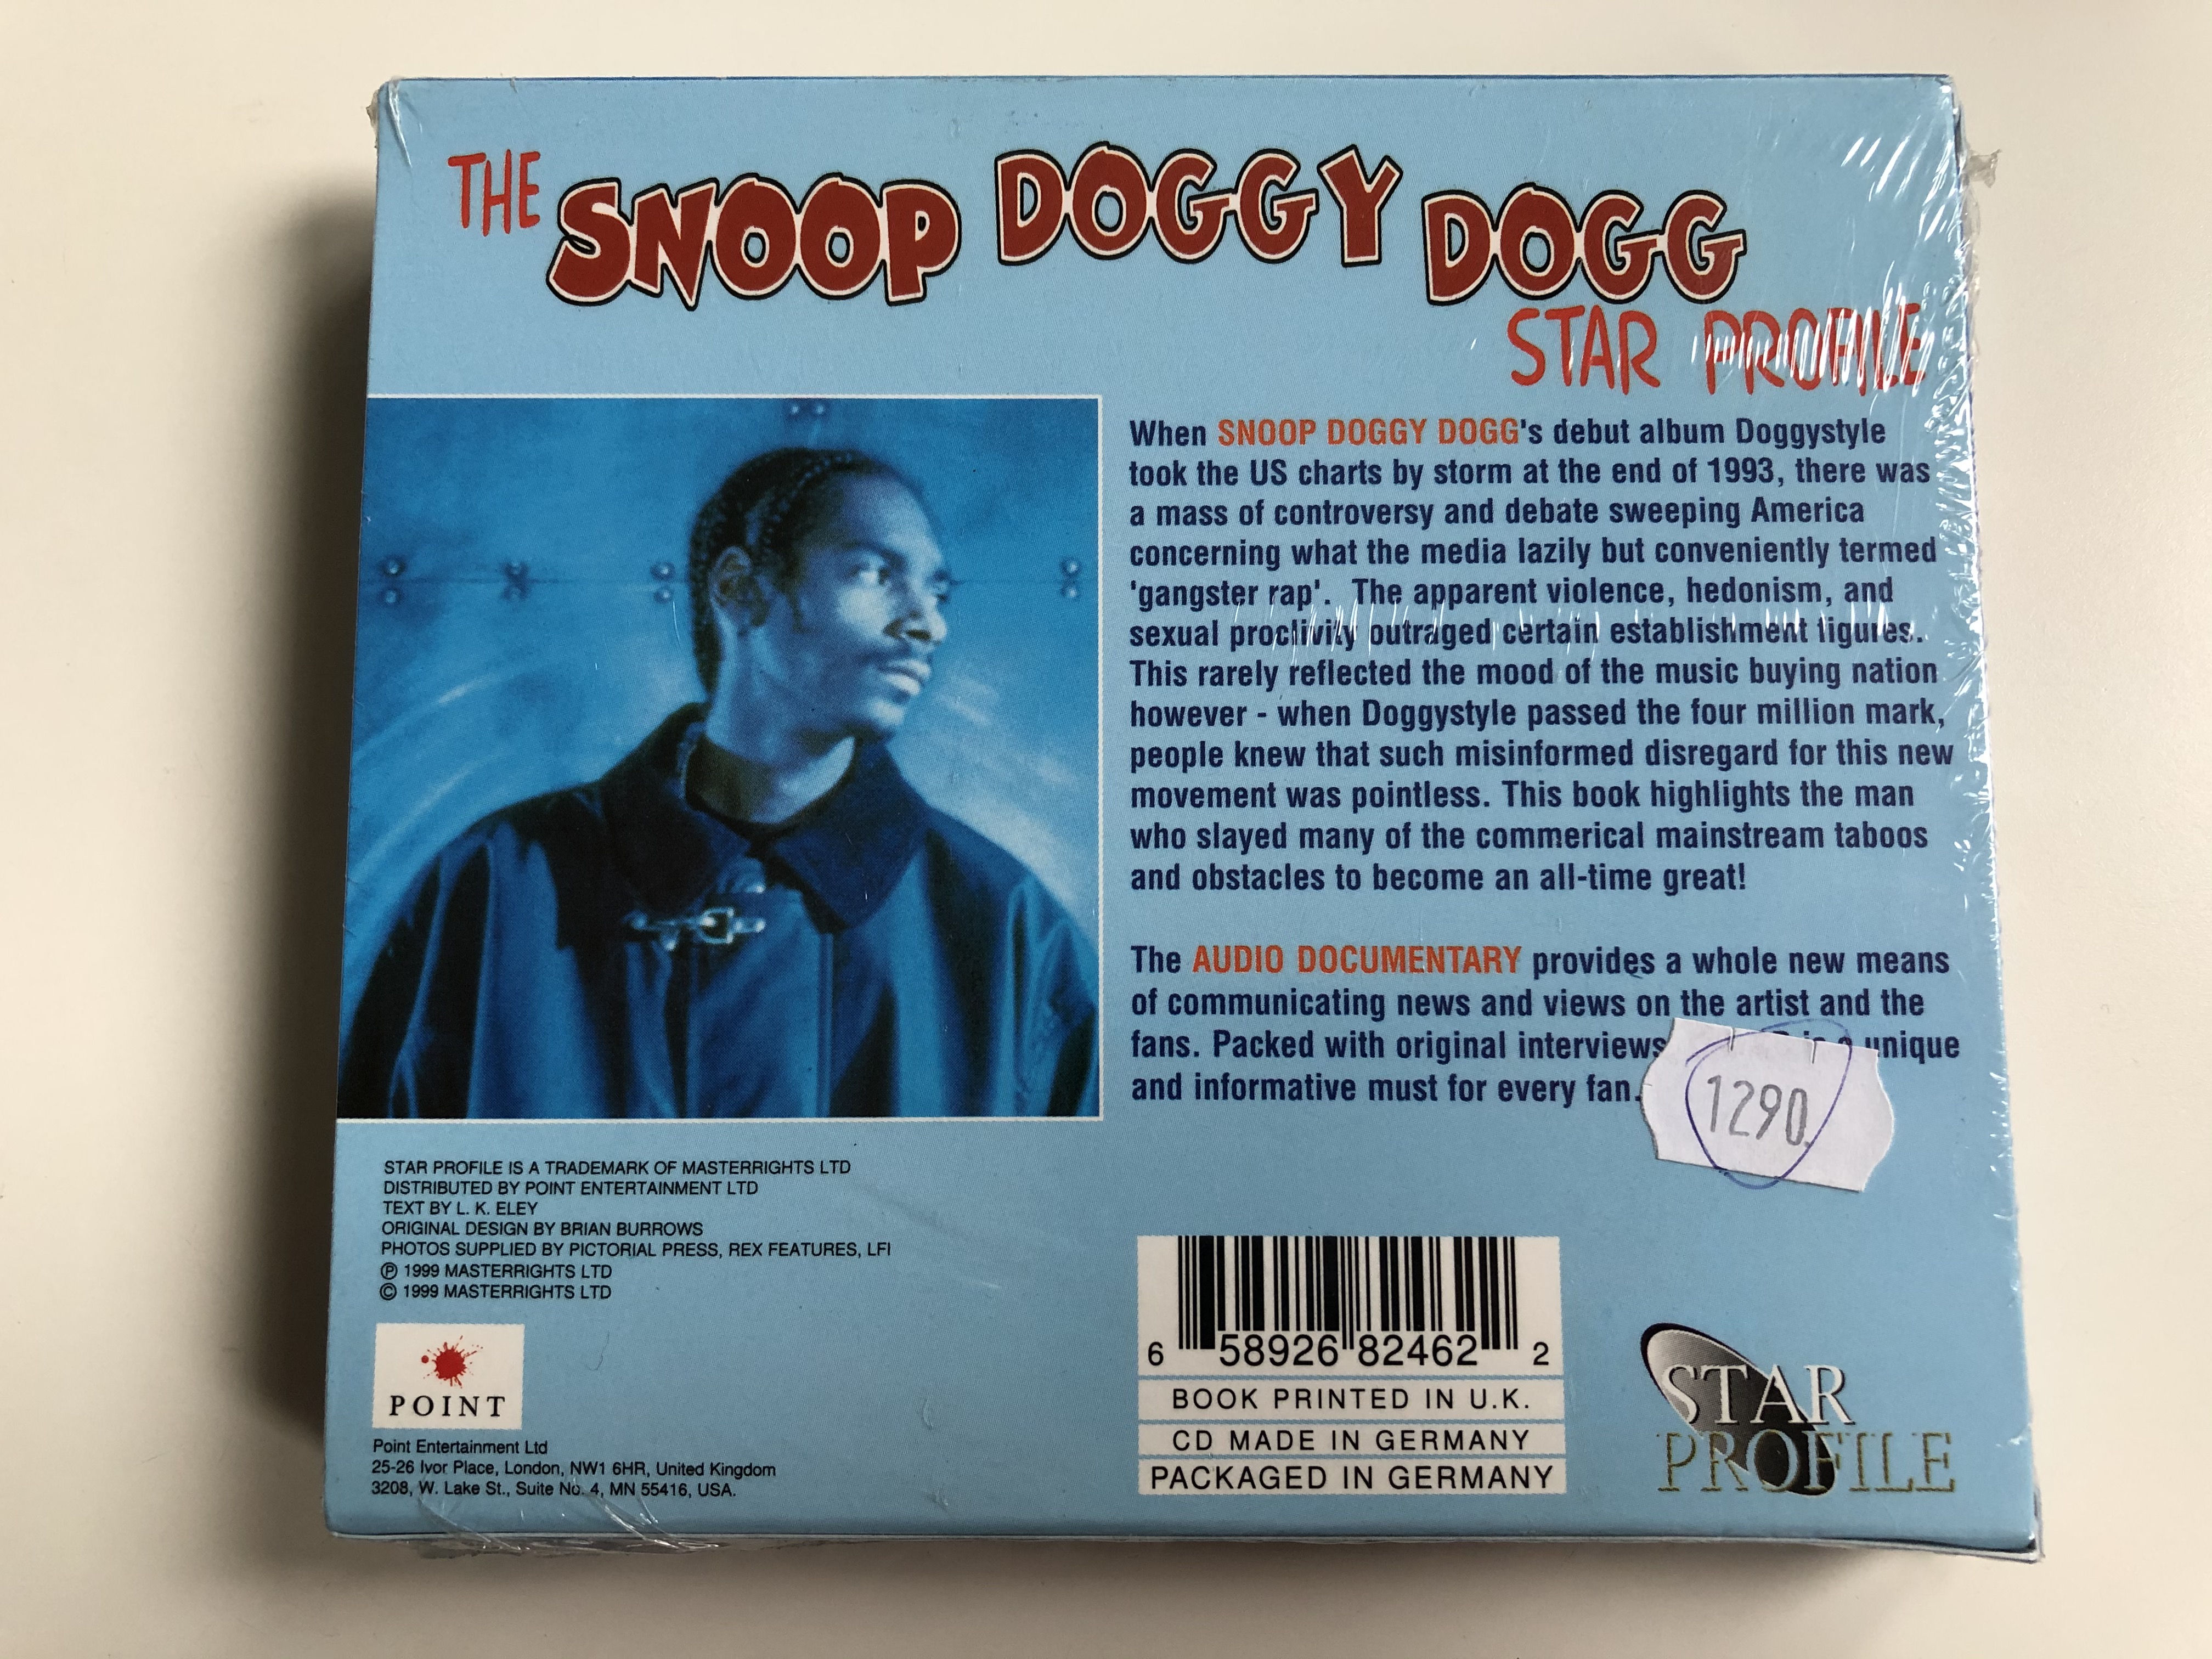 the-snoop-doggy-dogg-star-profile-100-page-full-color-picture-book-and-audio-documentary-cd-point-entertainment-ltd.-audio-cd-collcetors-book-1999-8248-4-.jpg